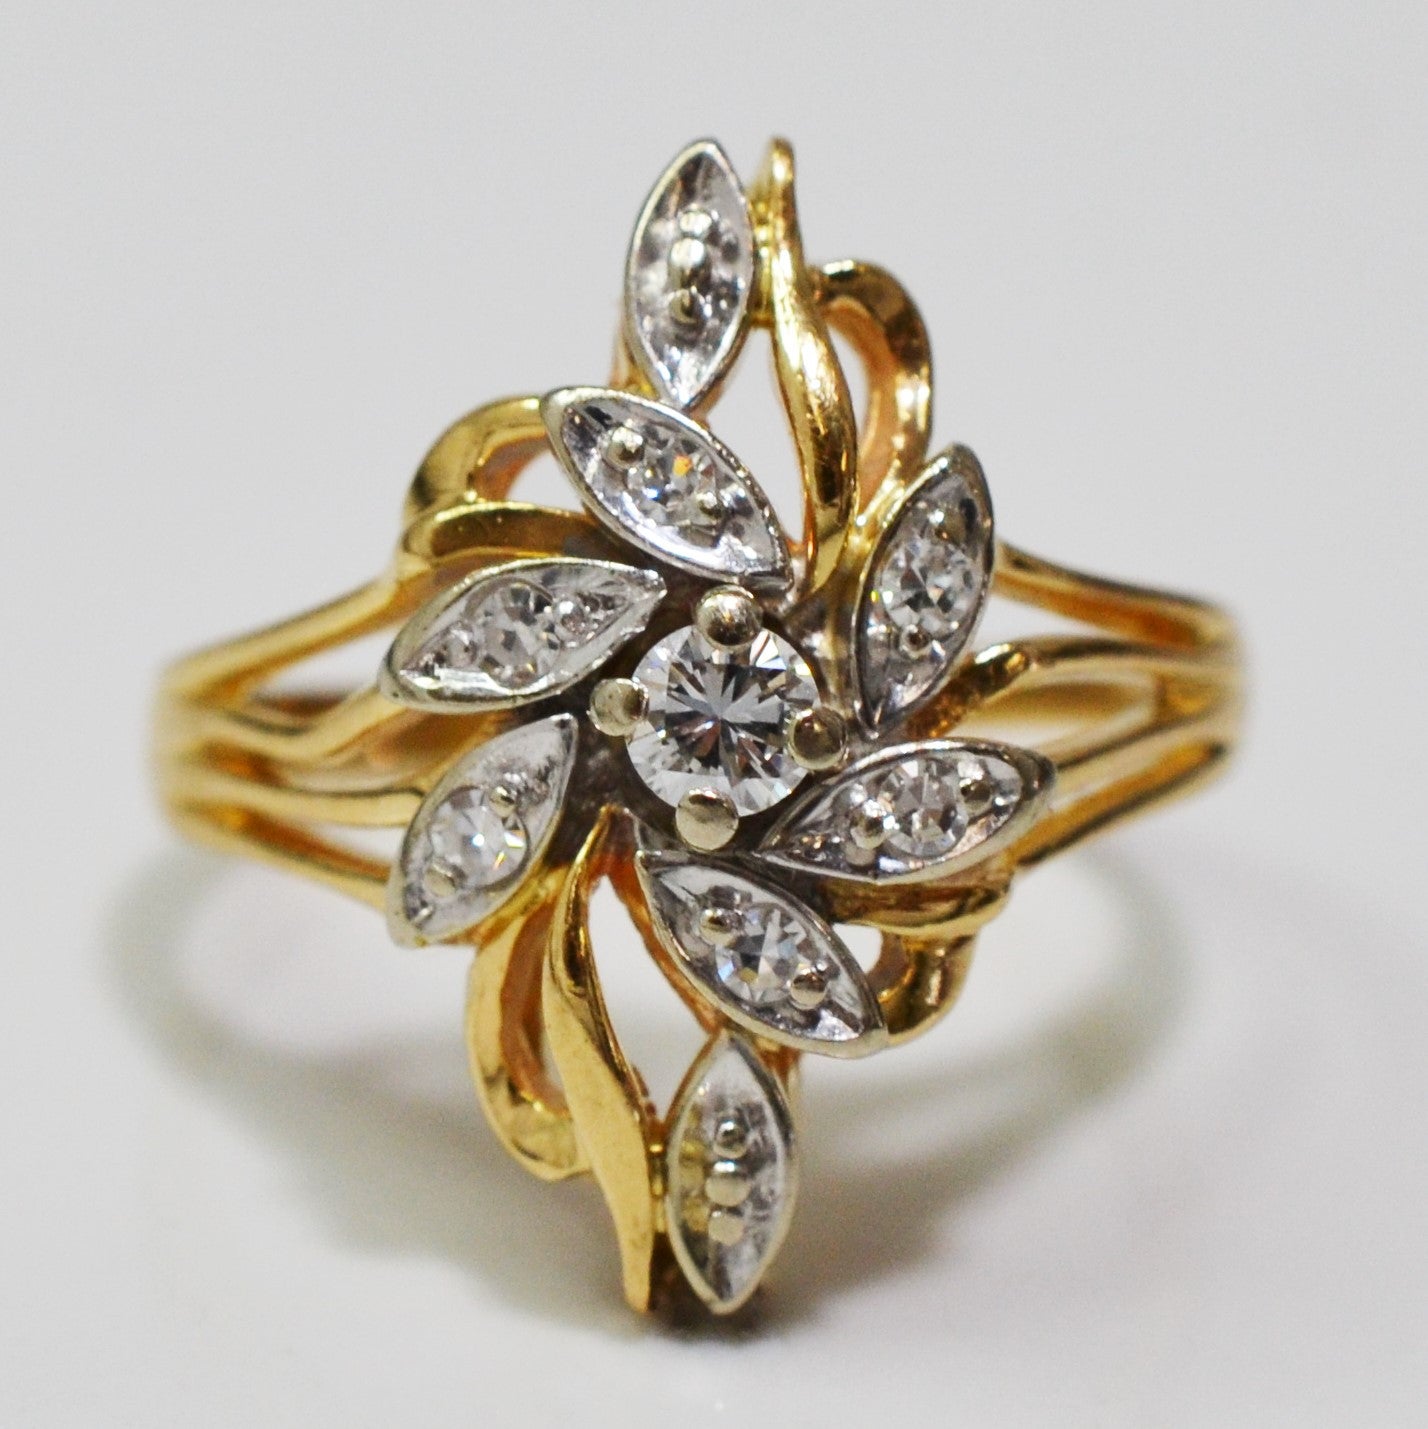 Floral Inspired Diamond Ring | 0.25ctw | SZ 7.75 |